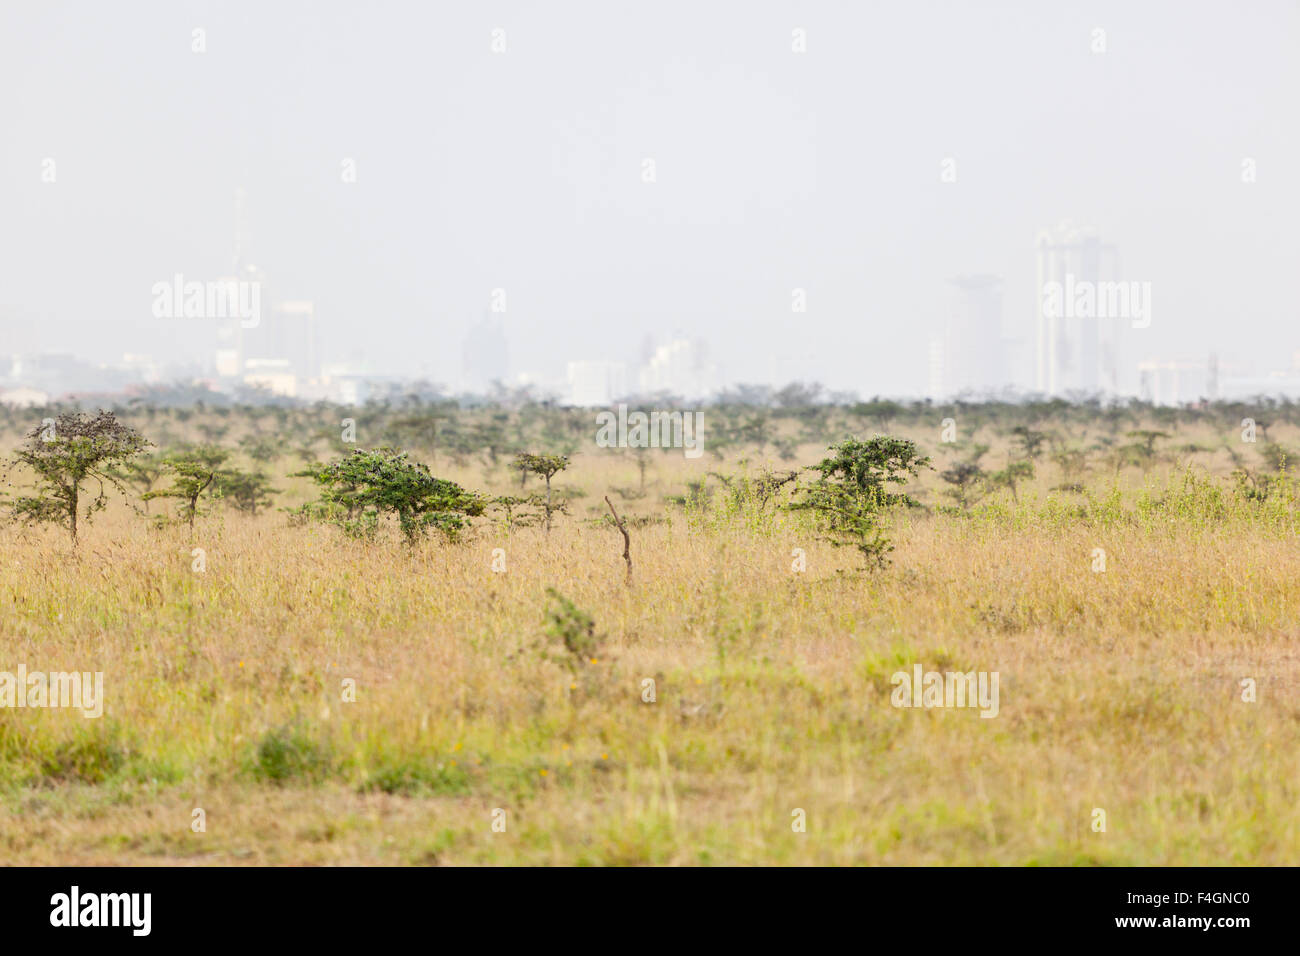 Landscape in Nairobi National Park in Kenya with the skyline in the background. Stock Photo